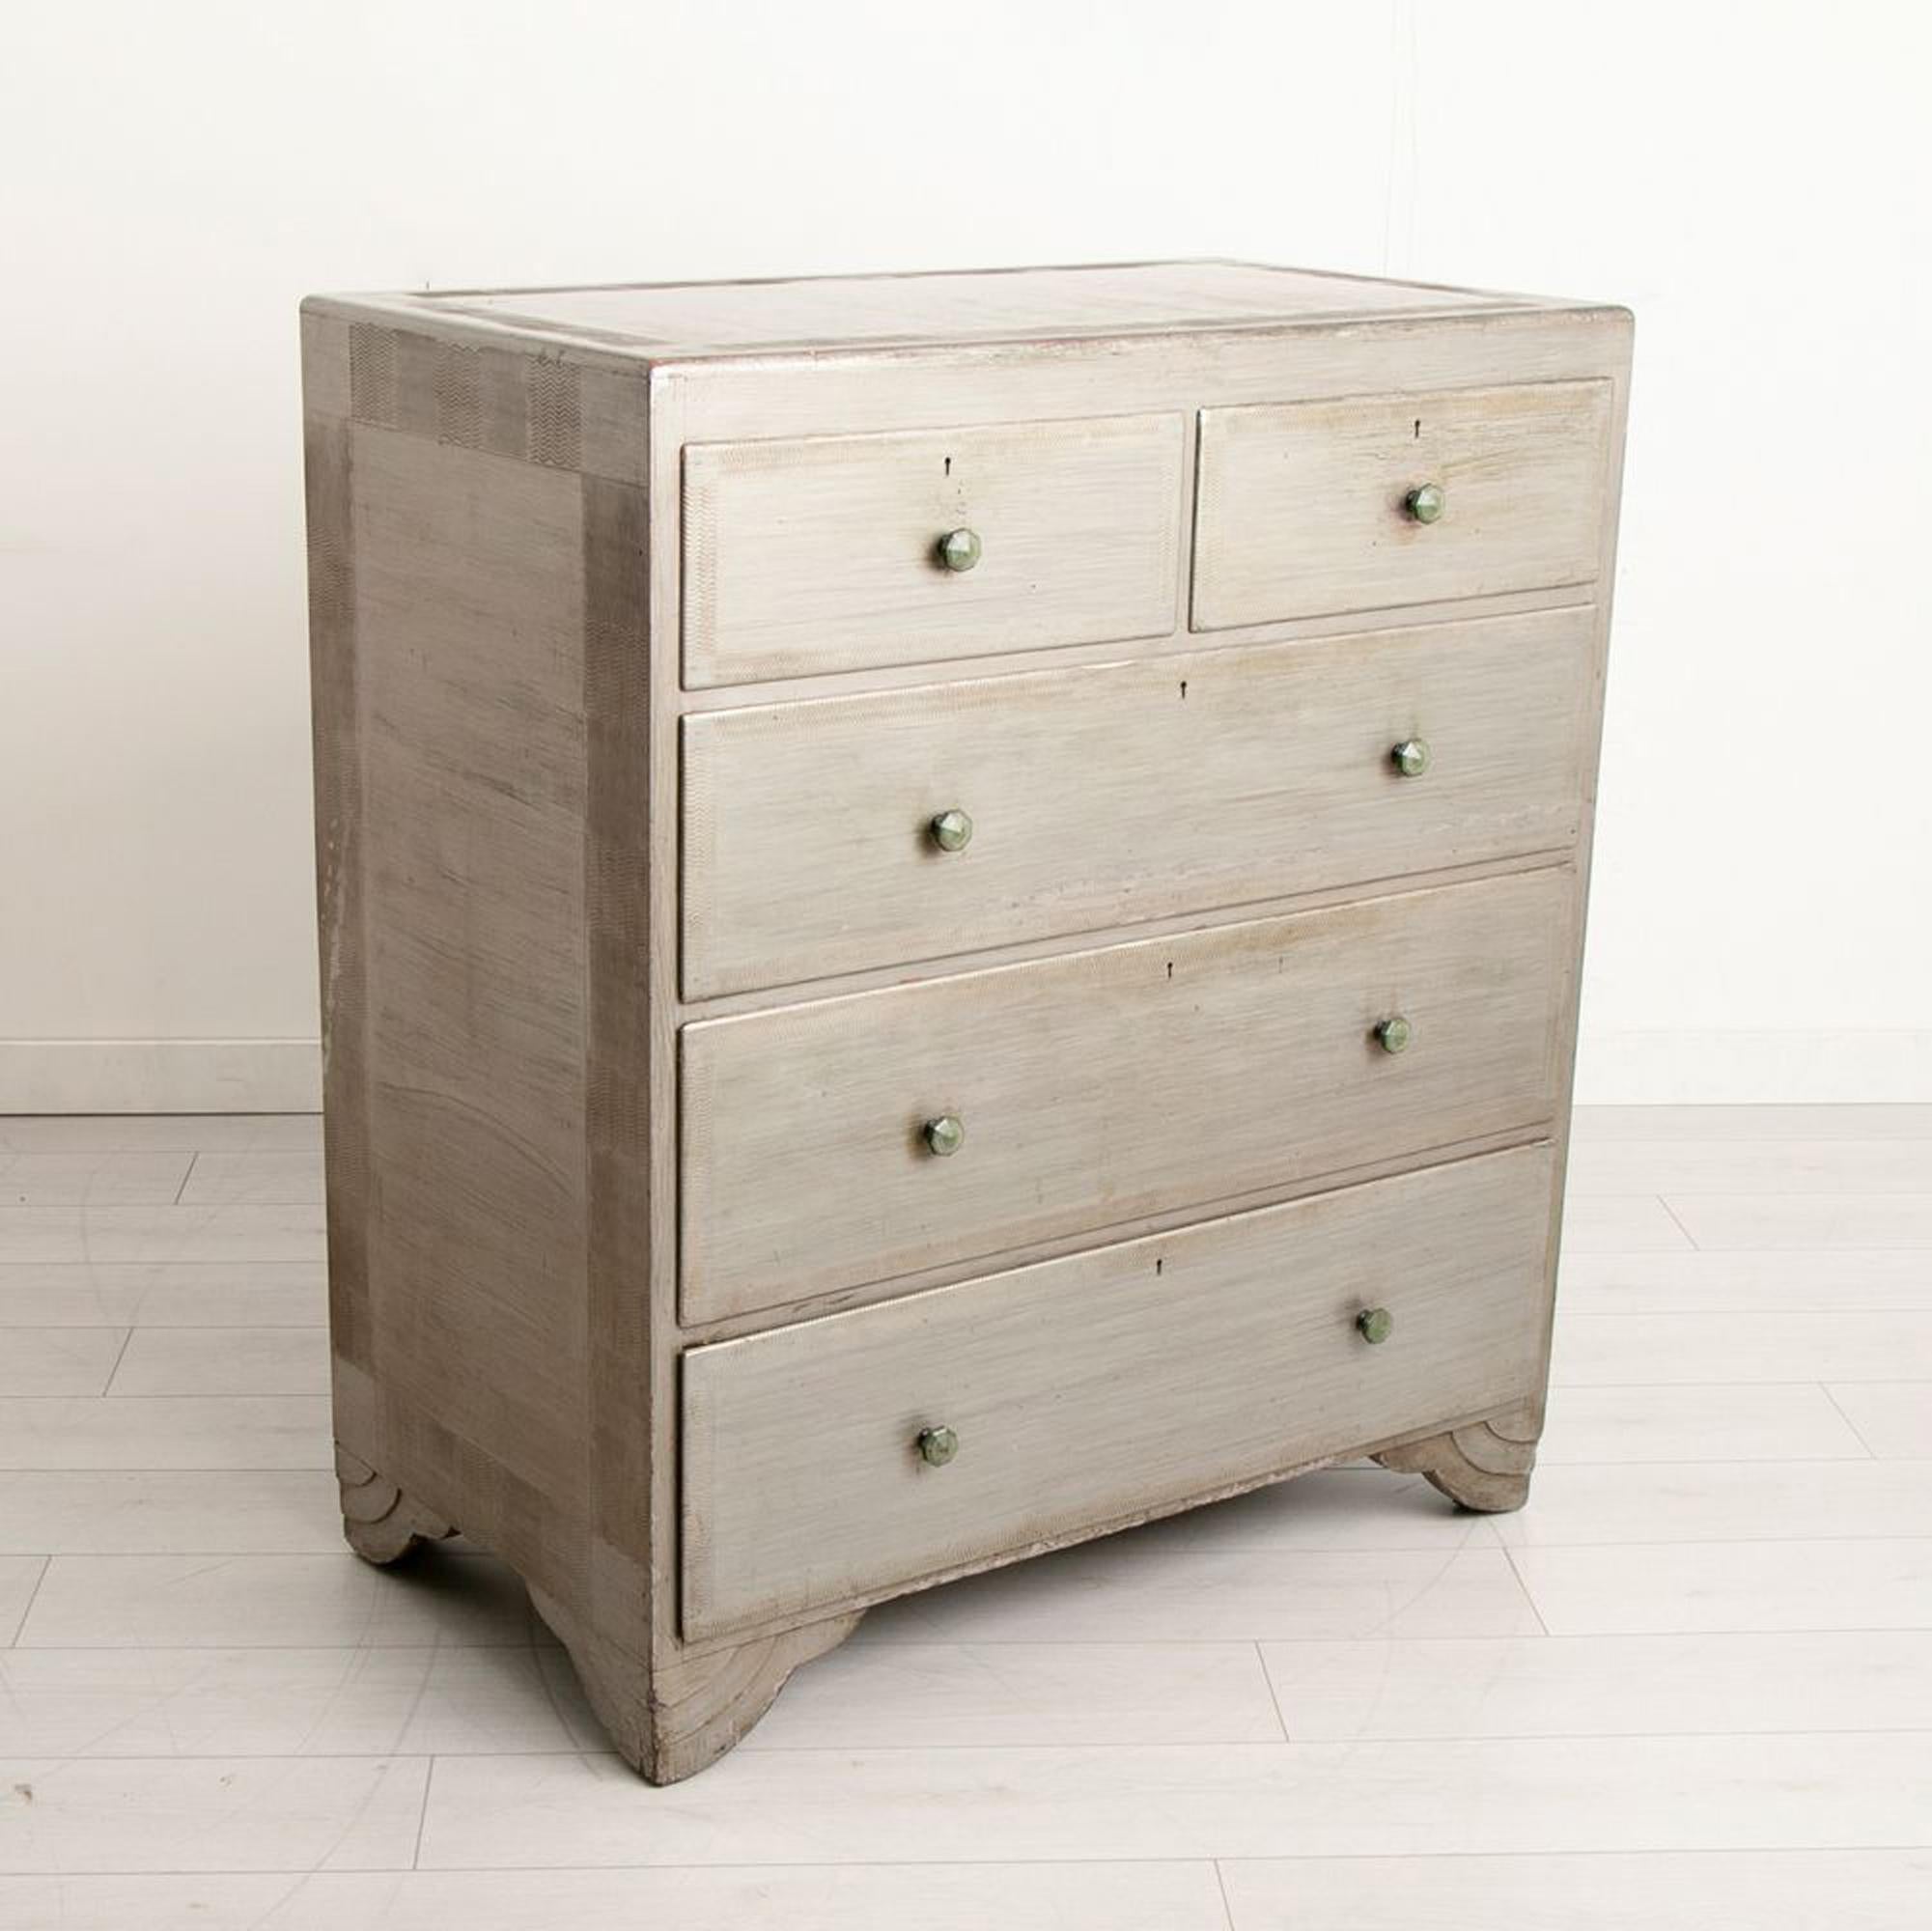 British Art Deco Chest of Drawers by Rowley of London, c.1930